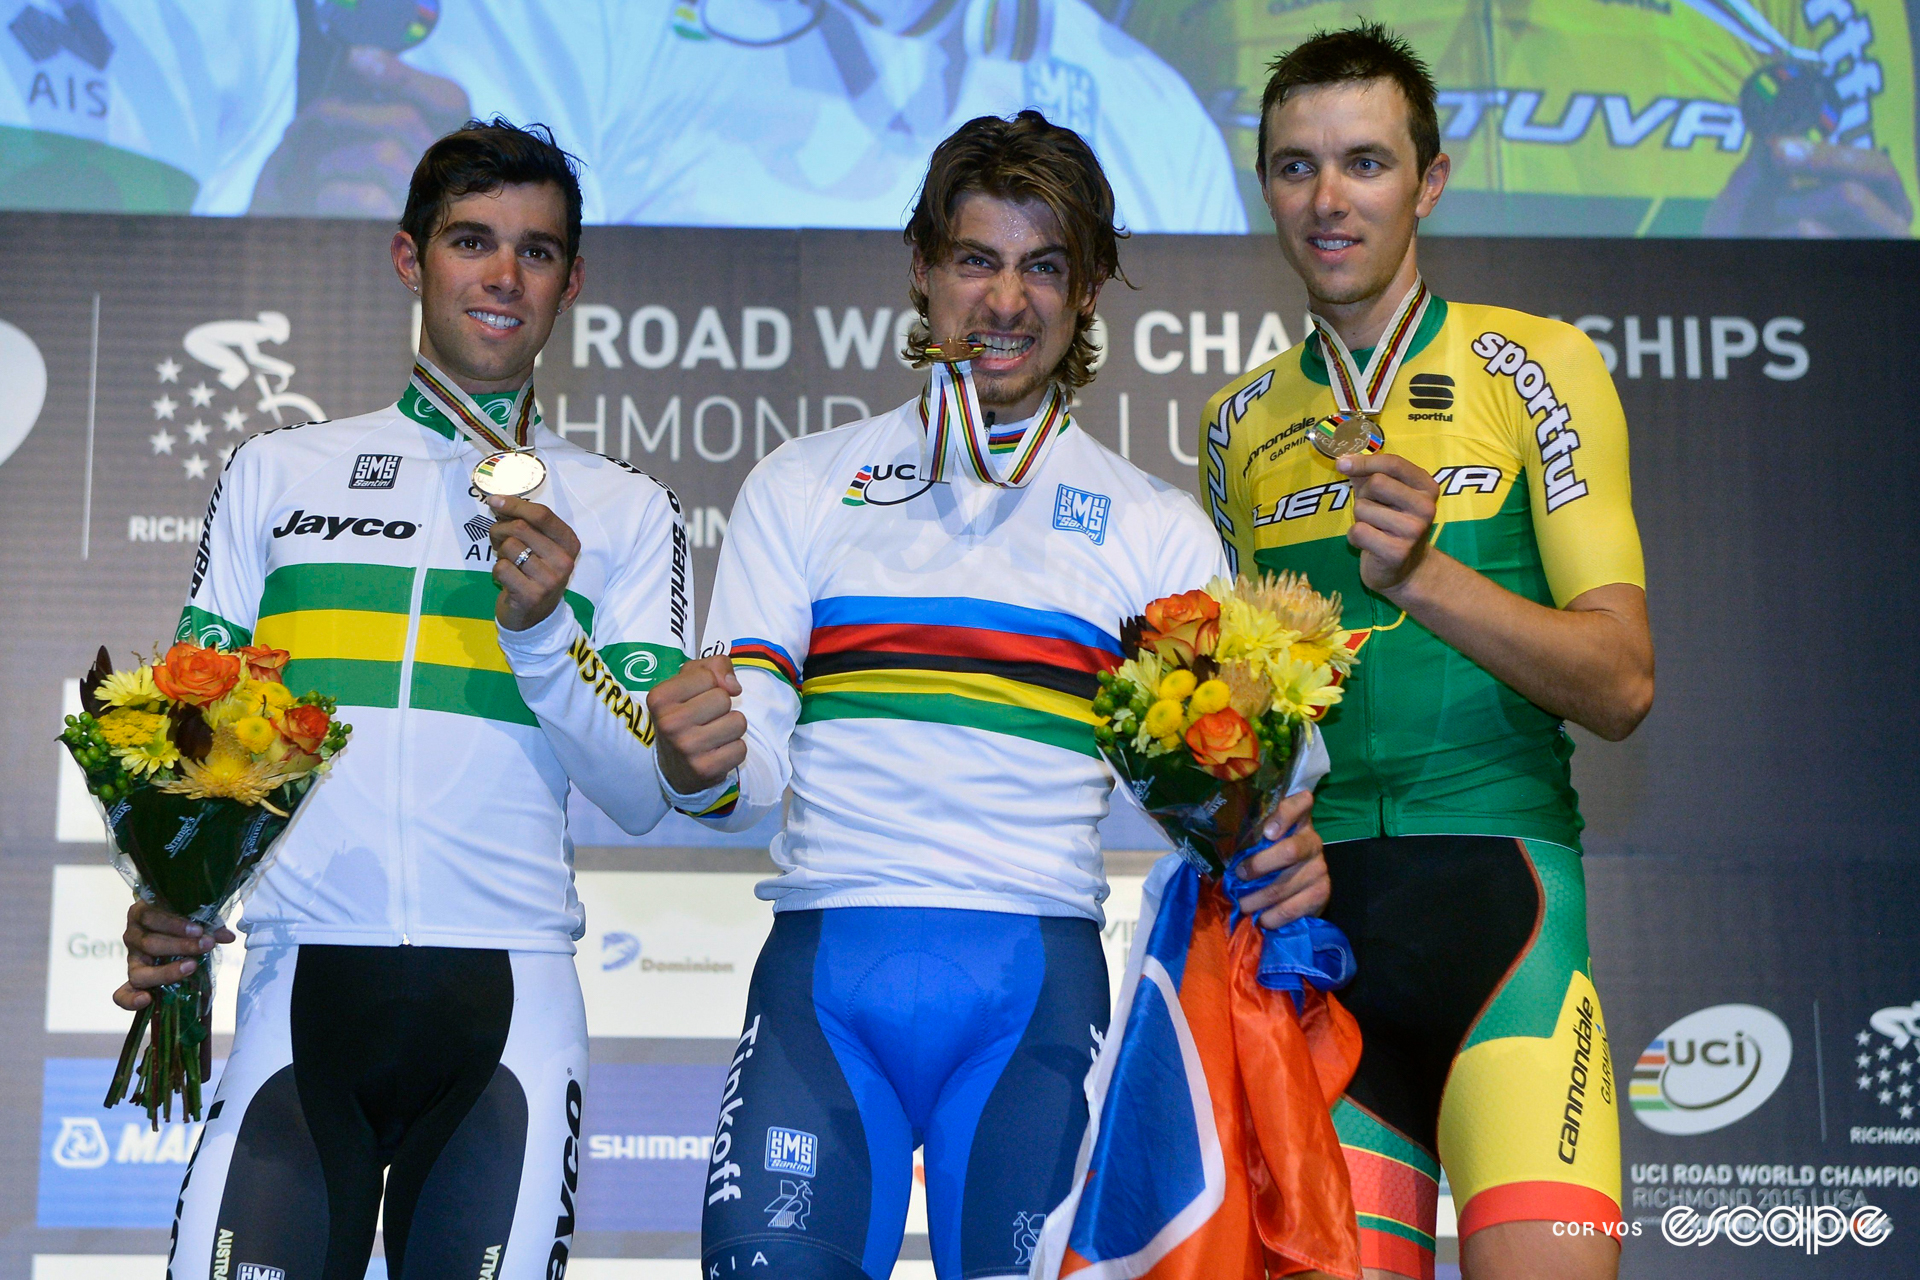 Peter Sagan bites on his gold medal on the podium after winning the 2015 world title. He's flanked by silver medalist Michael Matthews and bronze medalist Ramūnas Navardauskas.